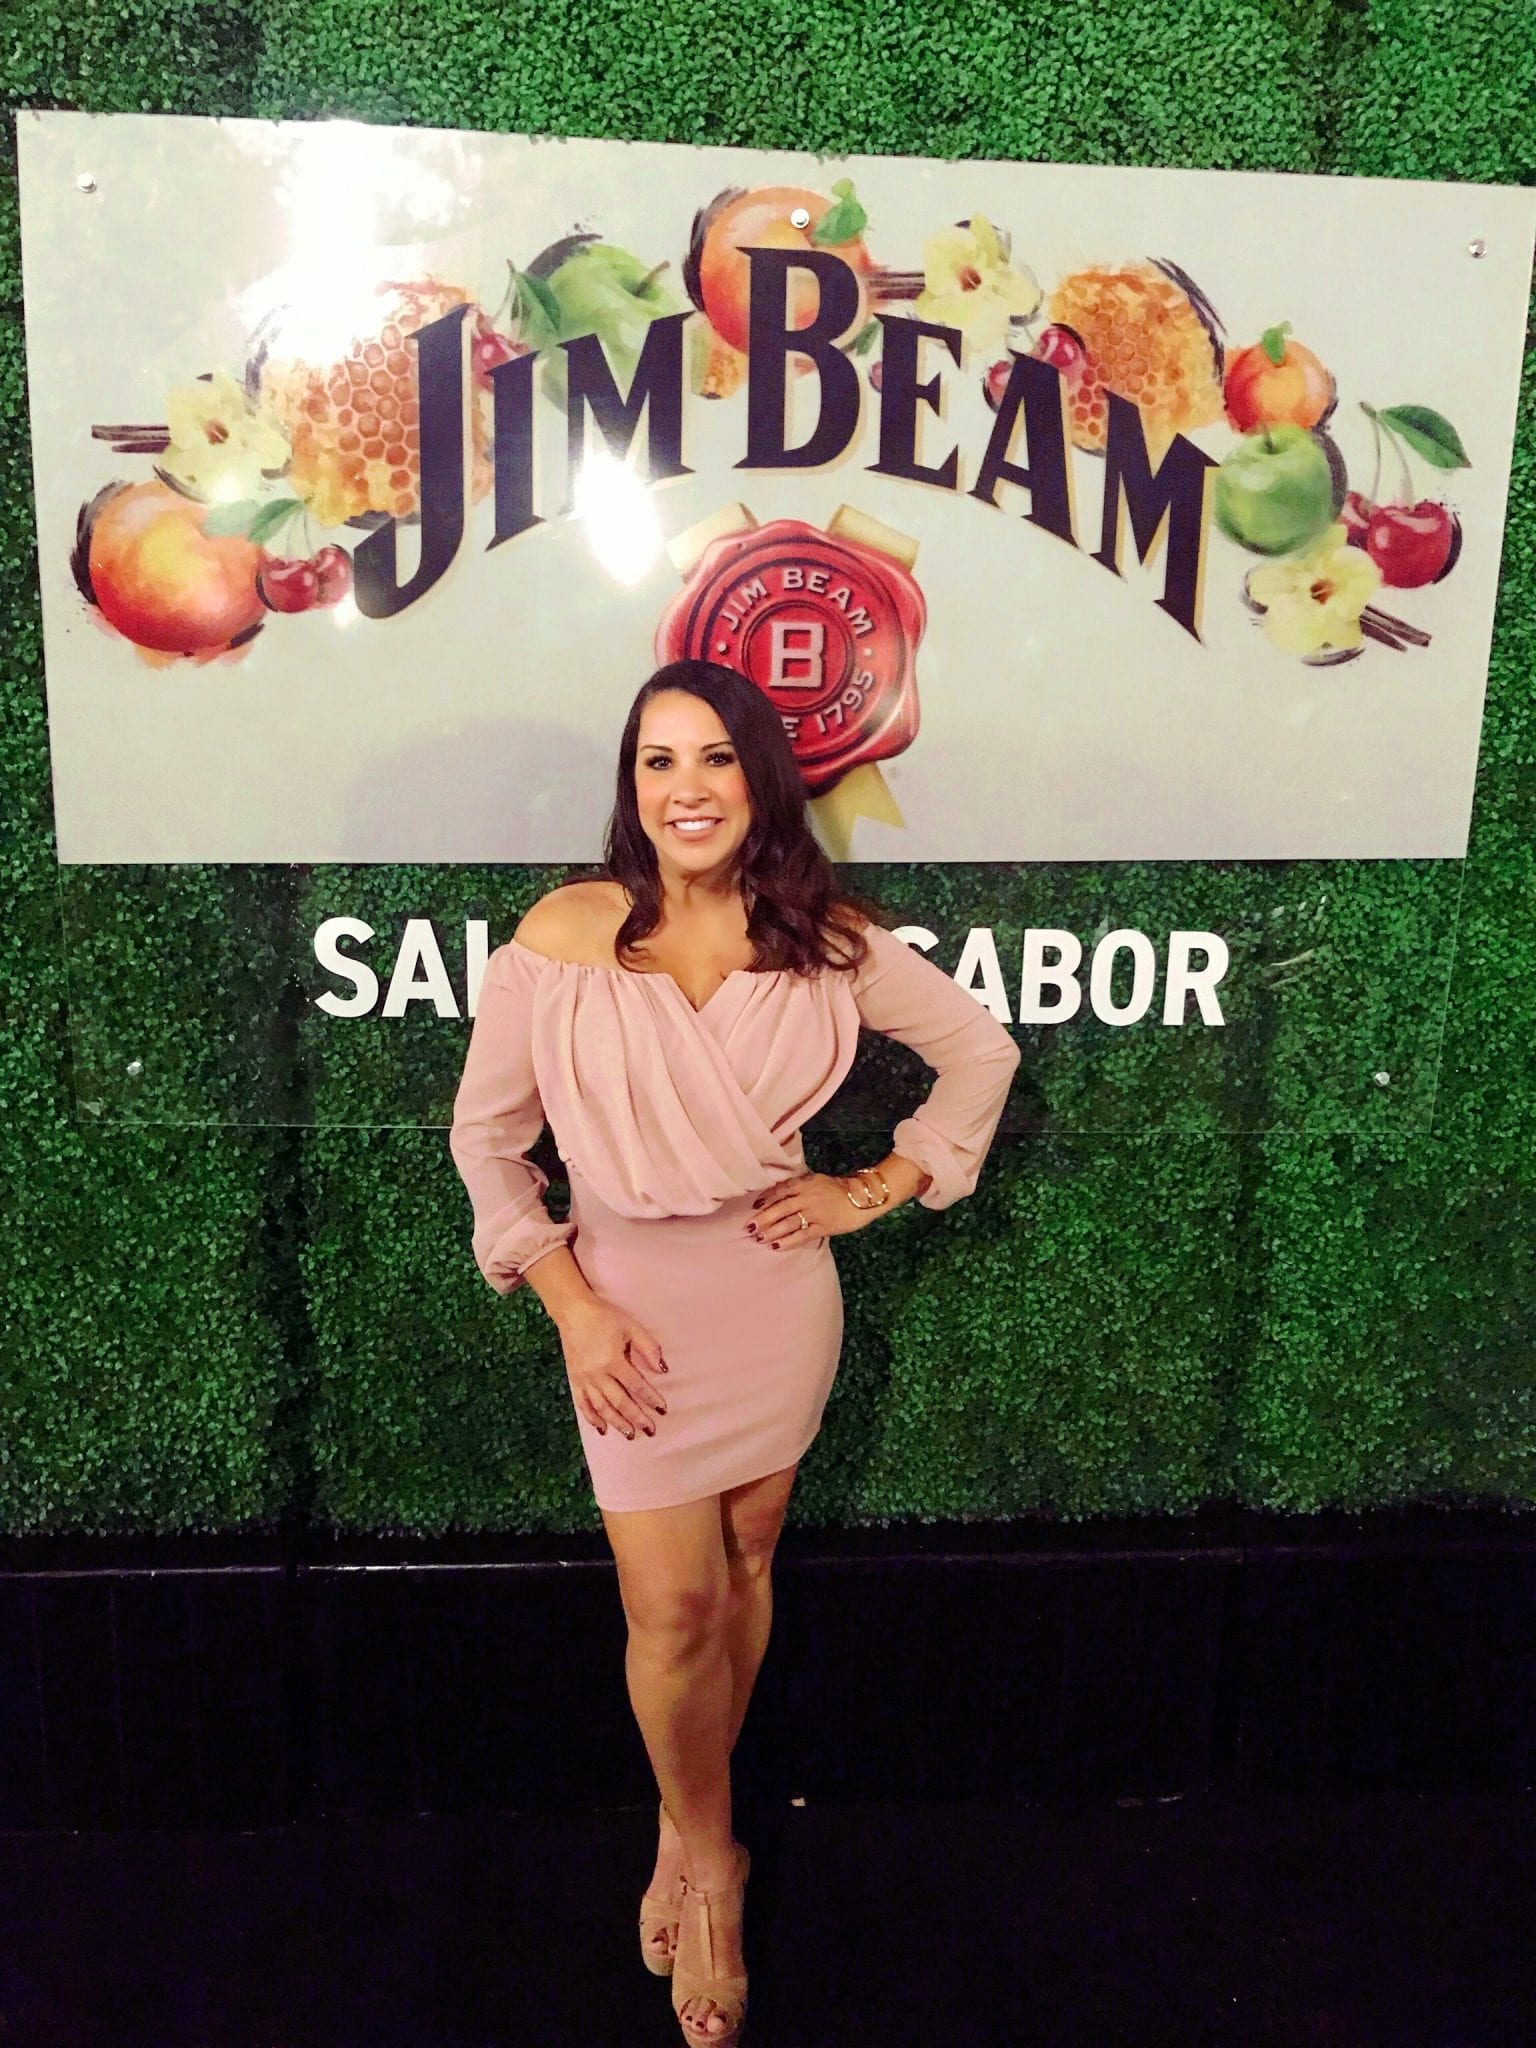 Jim Beam was one of our Sponsors at Hispanicize